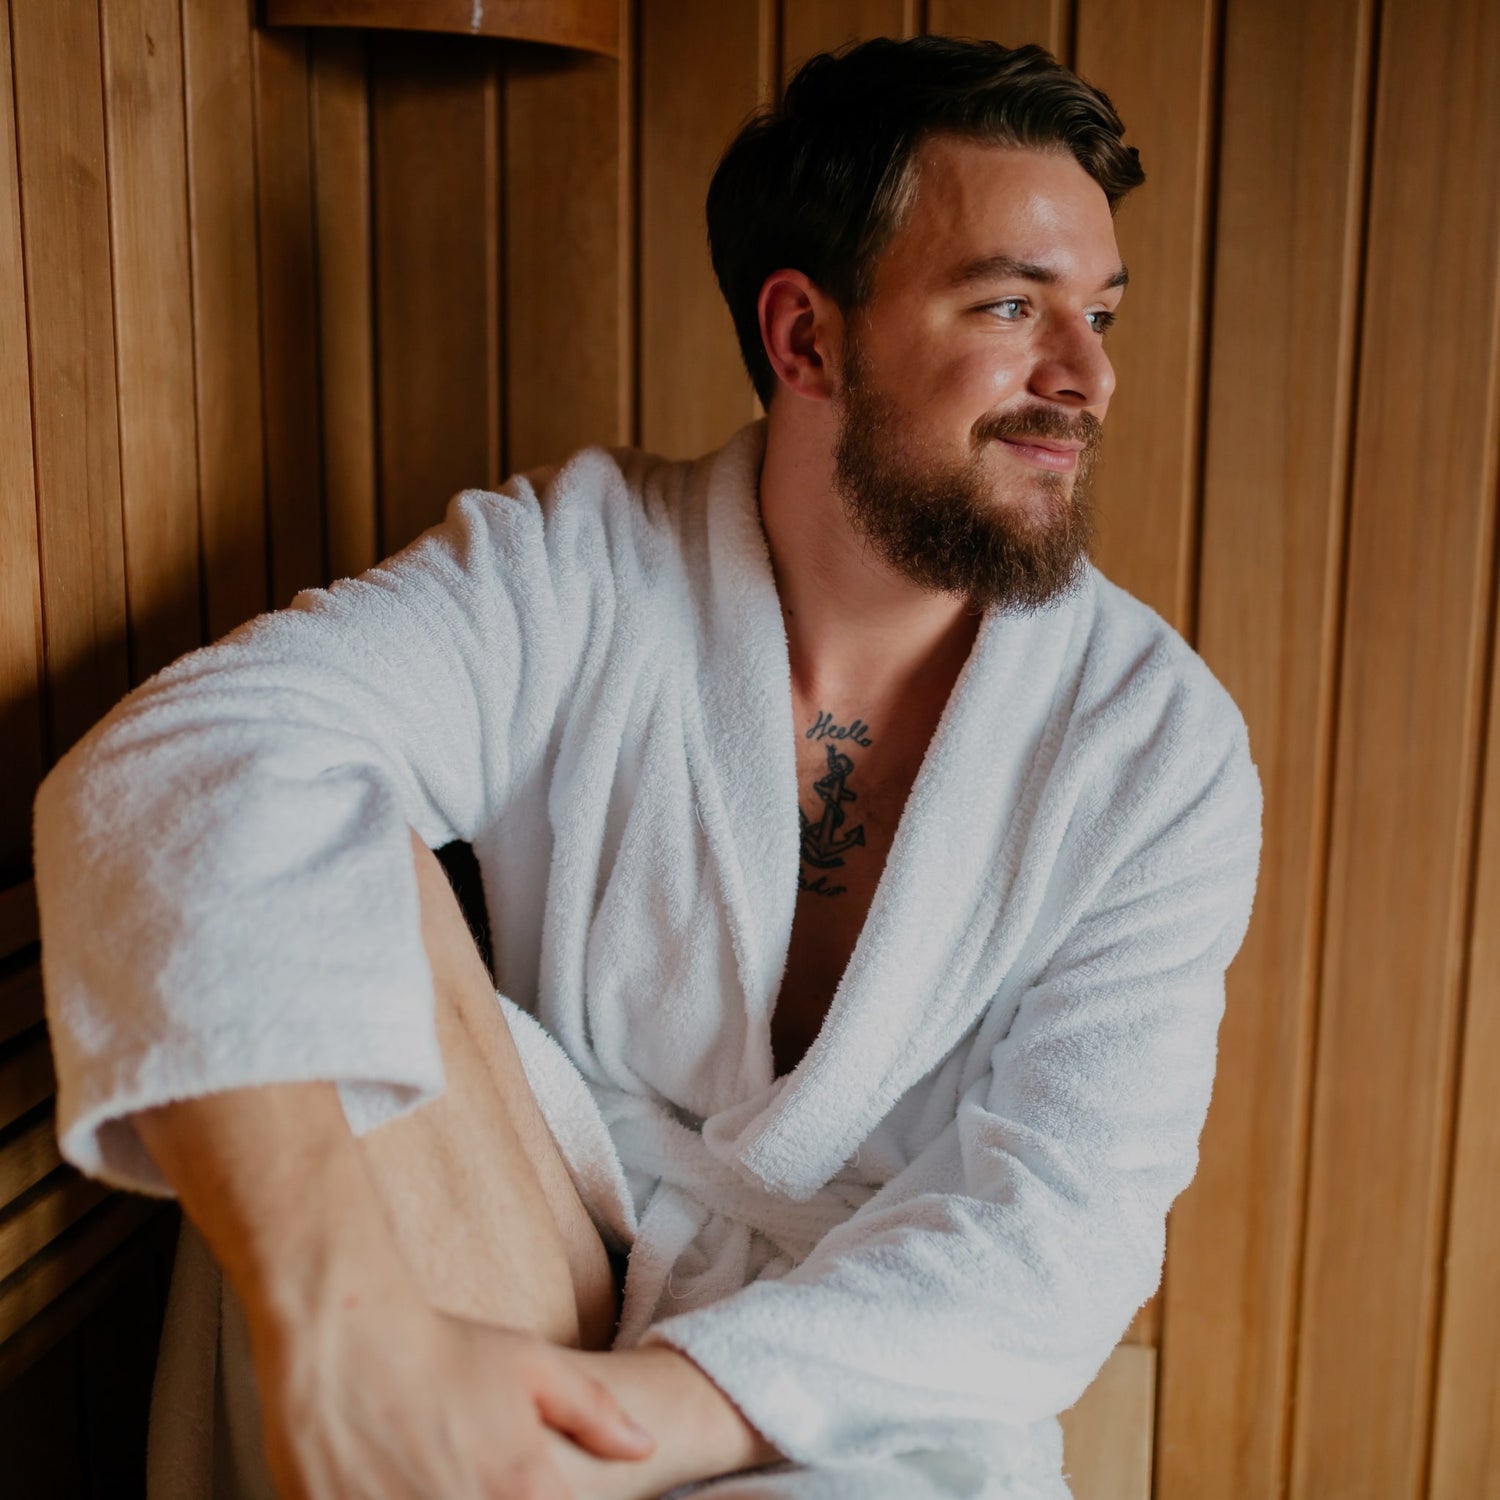 Guy smiling in a health mate sauna with a rope on